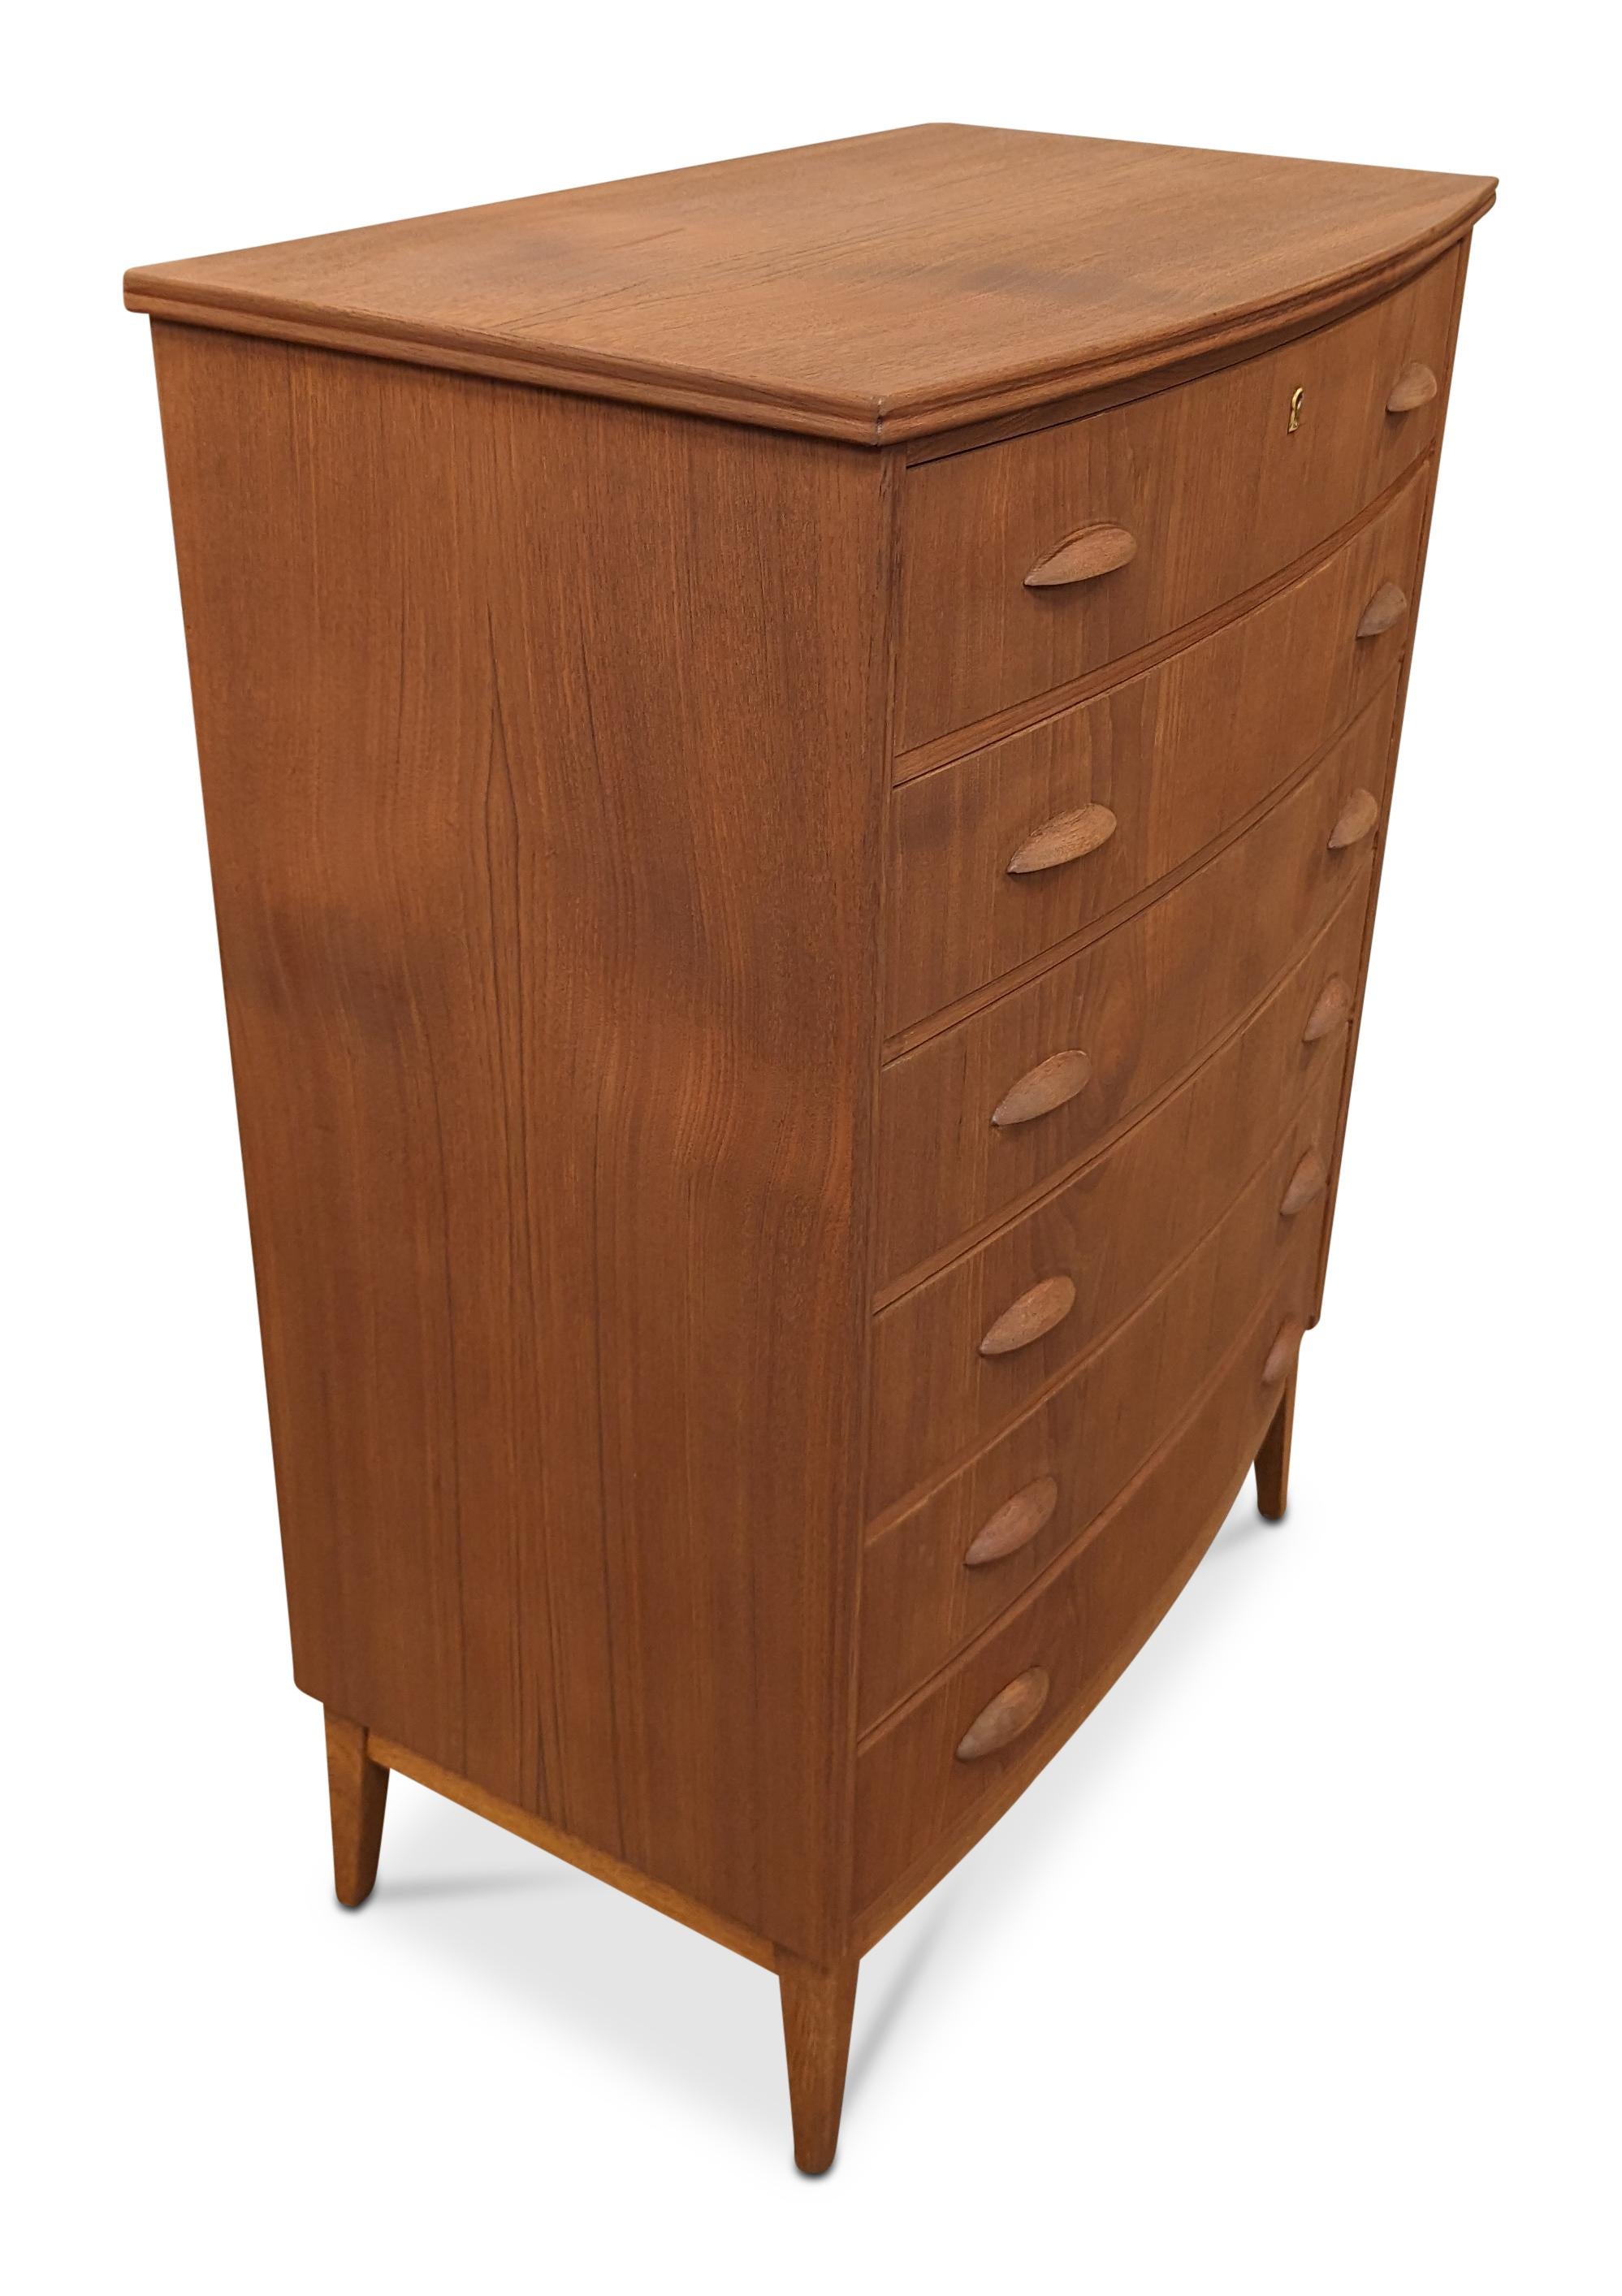 Vintage Danish Mid Century Tall Boy Teak Dresser- 022443 In Good Condition For Sale In Brooklyn, NY